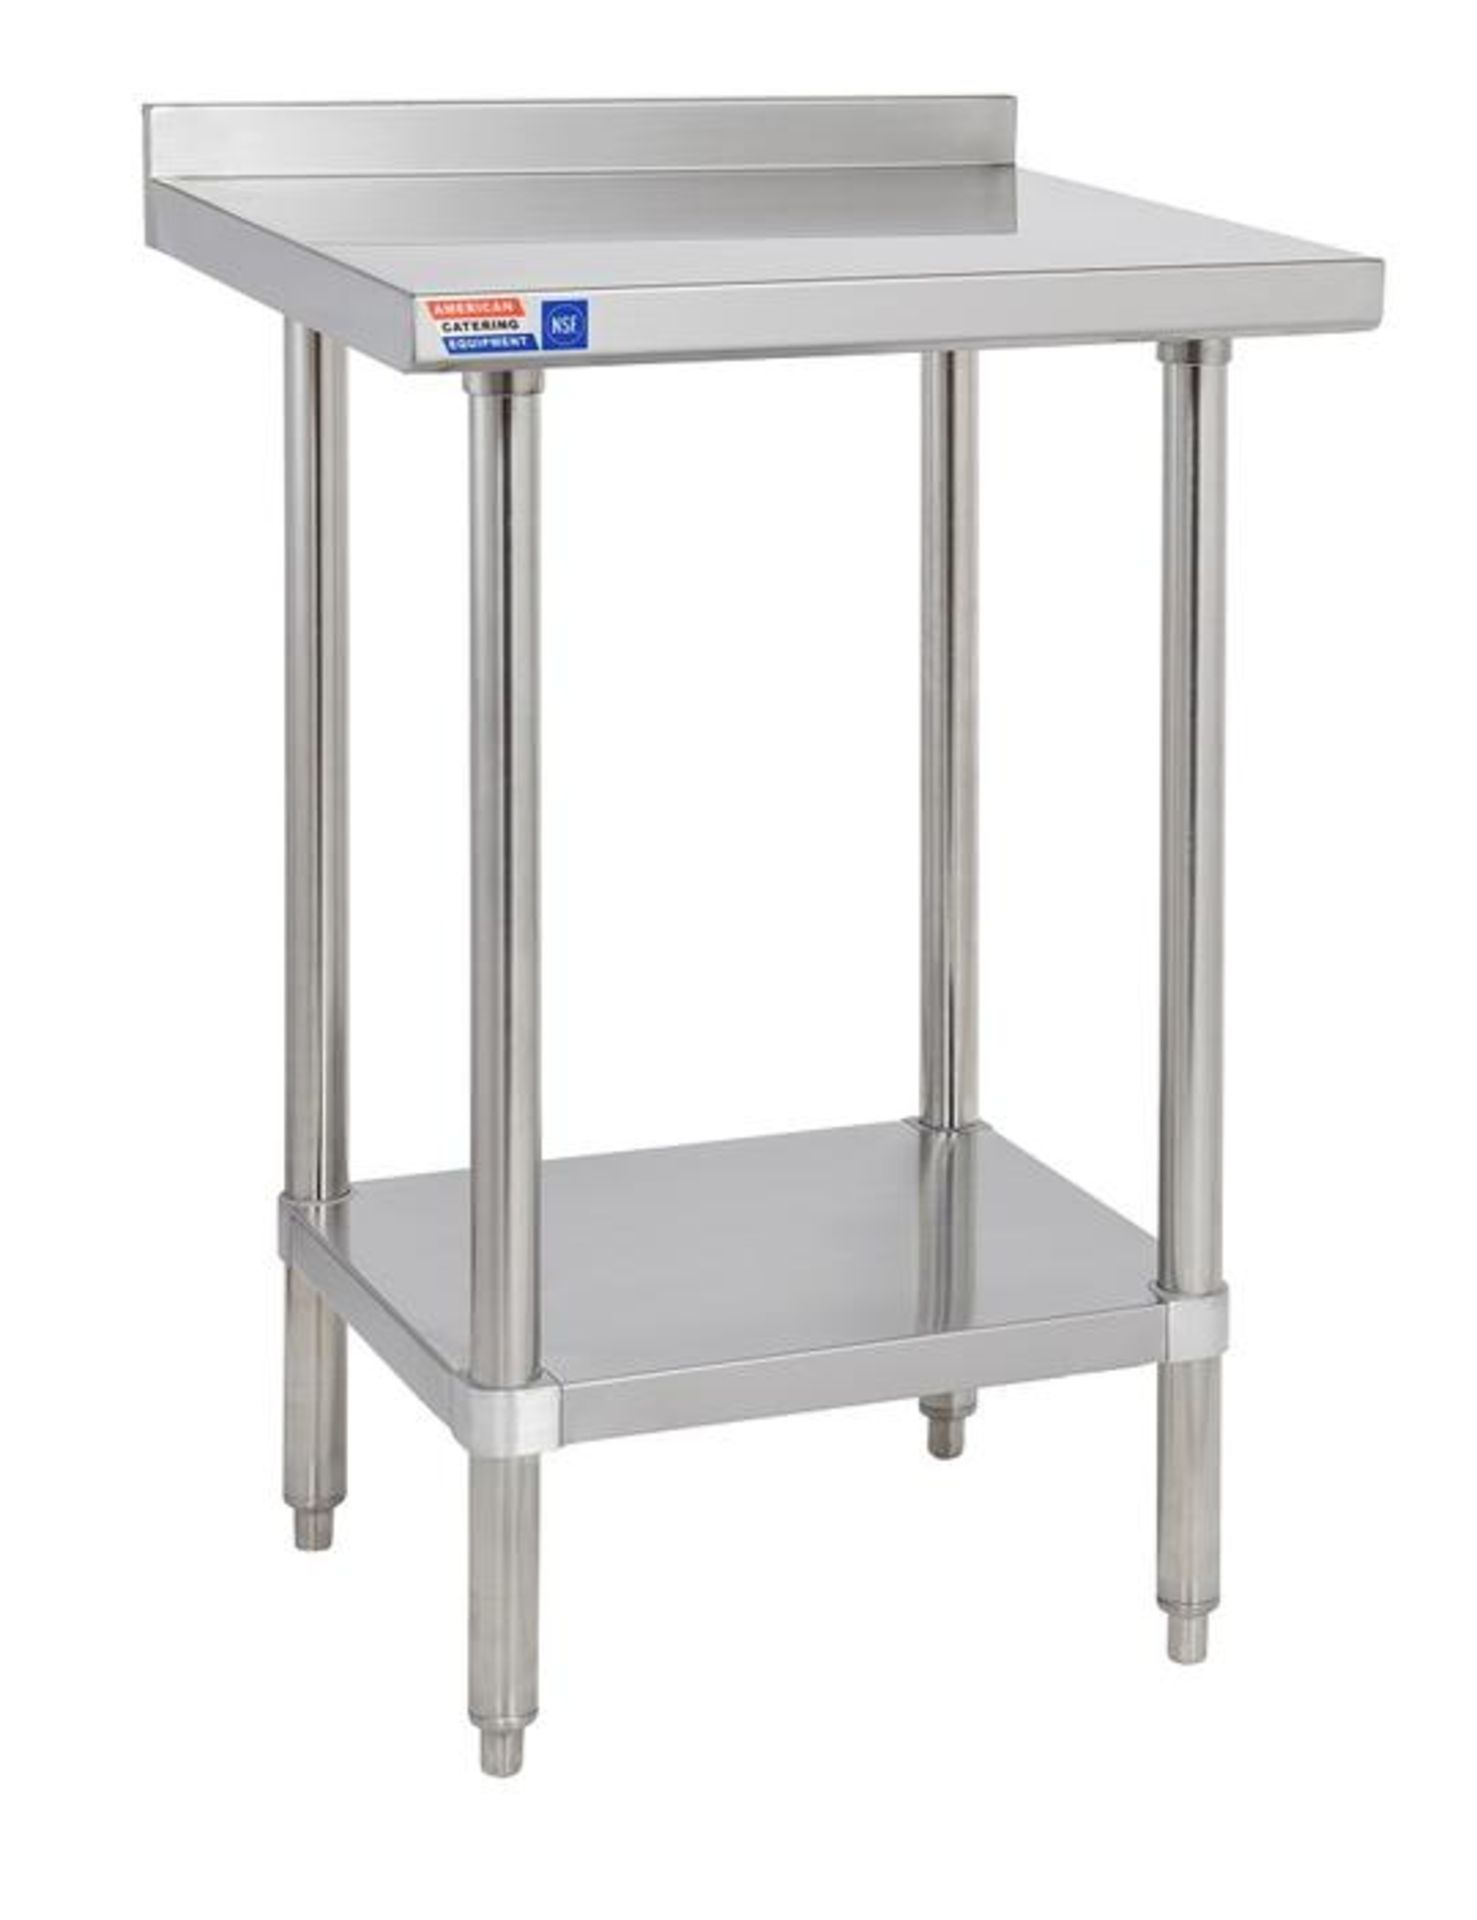 Stainless steel wall table heavy duty 610 x 610 mm